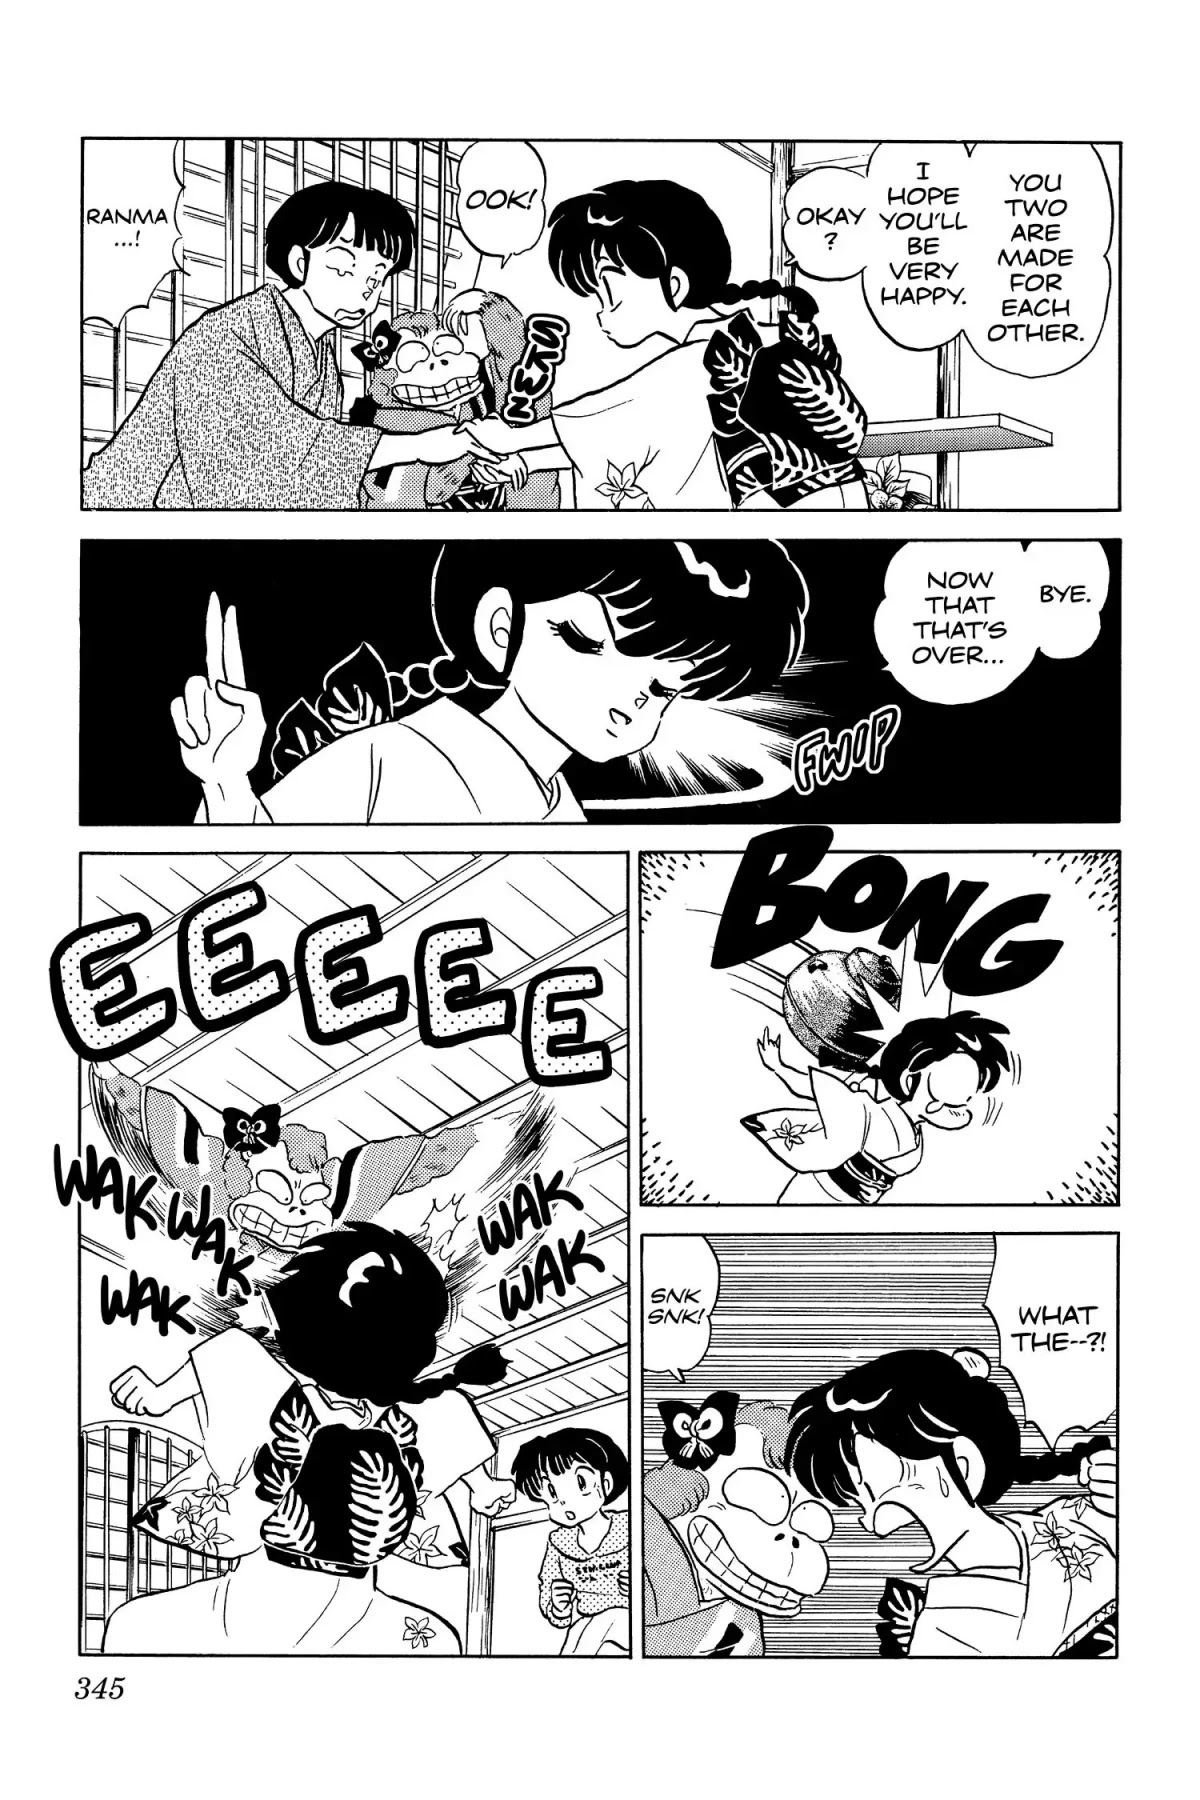 Ranma 1/2 Chapter 58: Proposal Accepted - Picture 3